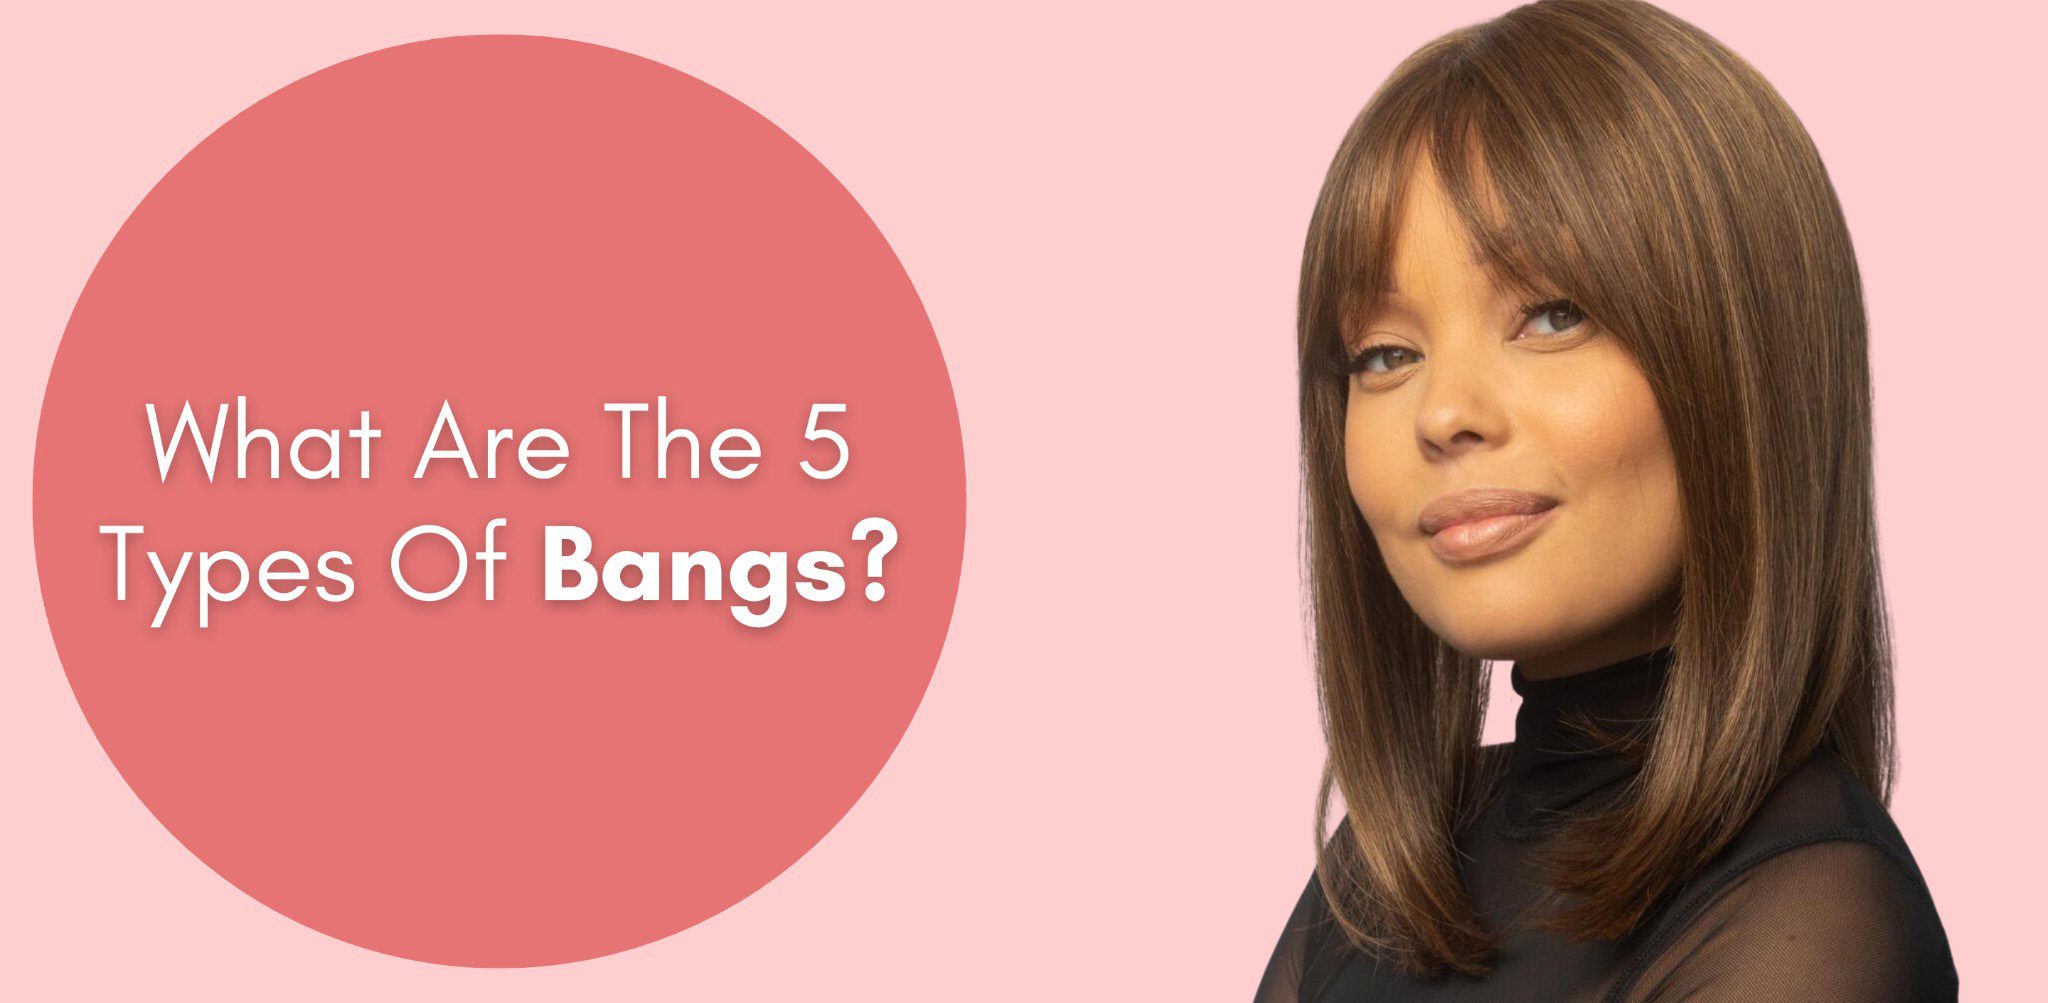 What Are The 5 Types Of Bangs?